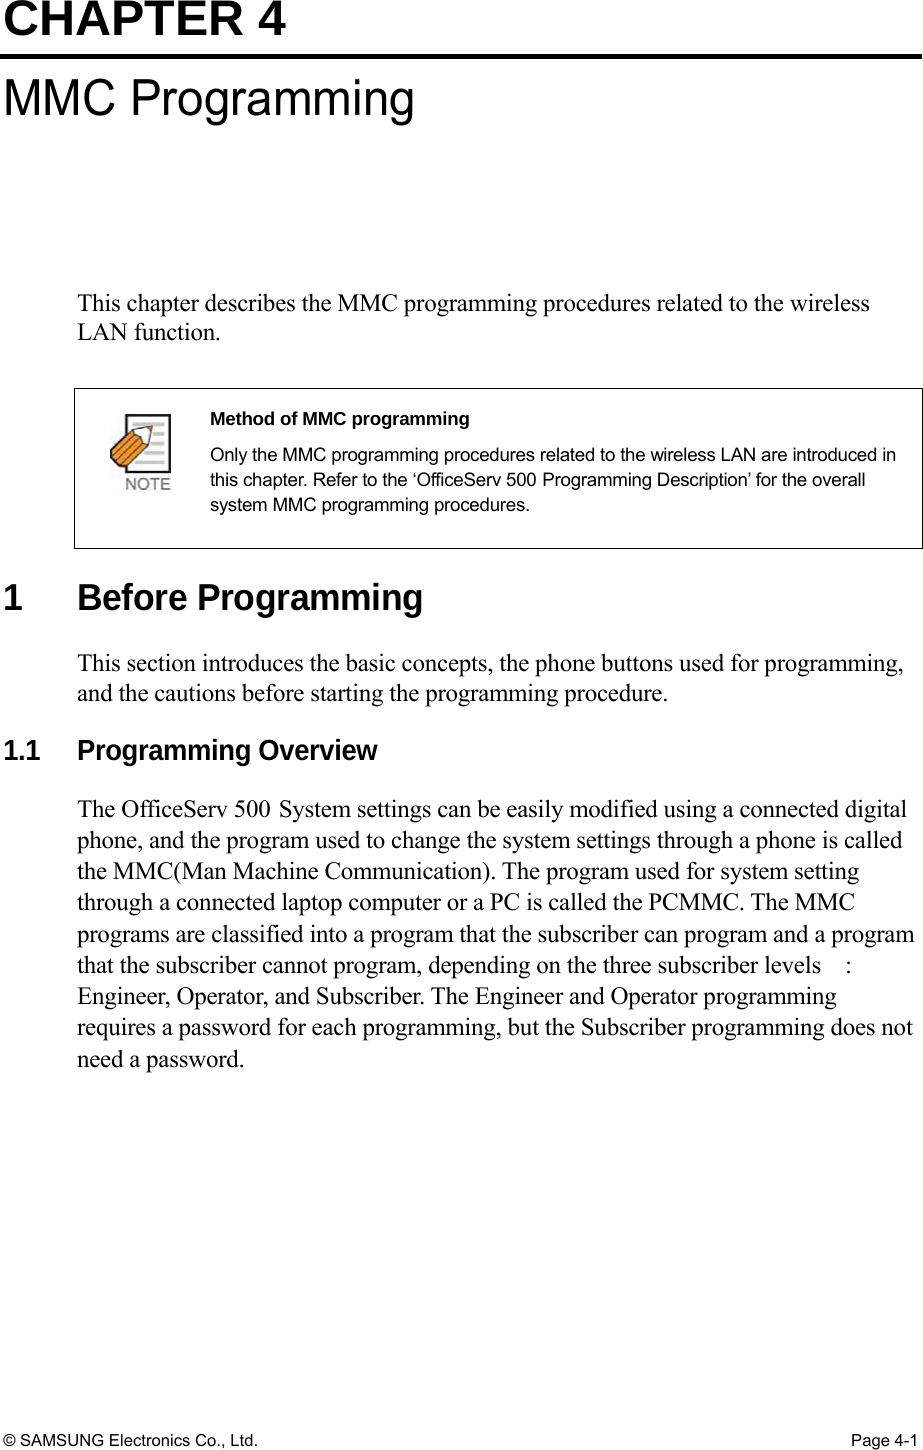 CHAPTER 4 © SAMSUNG Electronics Co., Ltd.  Page 4-1 MMC Programming This chapter describes the MMC programming procedures related to the wireless LAN function.    Method of MMC programming   Only the MMC programming procedures related to the wireless LAN are introduced in this chapter. Refer to the ‘OfficeServ 500 Programming Description’ for the overall system MMC programming procedures.  1 Before Programming This section introduces the basic concepts, the phone buttons used for programming, and the cautions before starting the programming procedure.  1.1 Programming Overview The OfficeServ 500 System settings can be easily modified using a connected digital phone, and the program used to change the system settings through a phone is called the MMC(Man Machine Communication). The program used for system setting through a connected laptop computer or a PC is called the PCMMC. The MMC programs are classified into a program that the subscriber can program and a program that the subscriber cannot program, depending on the three subscriber levels    : Engineer, Operator, and Subscriber. The Engineer and Operator programming requires a password for each programming, but the Subscriber programming does not need a password.    